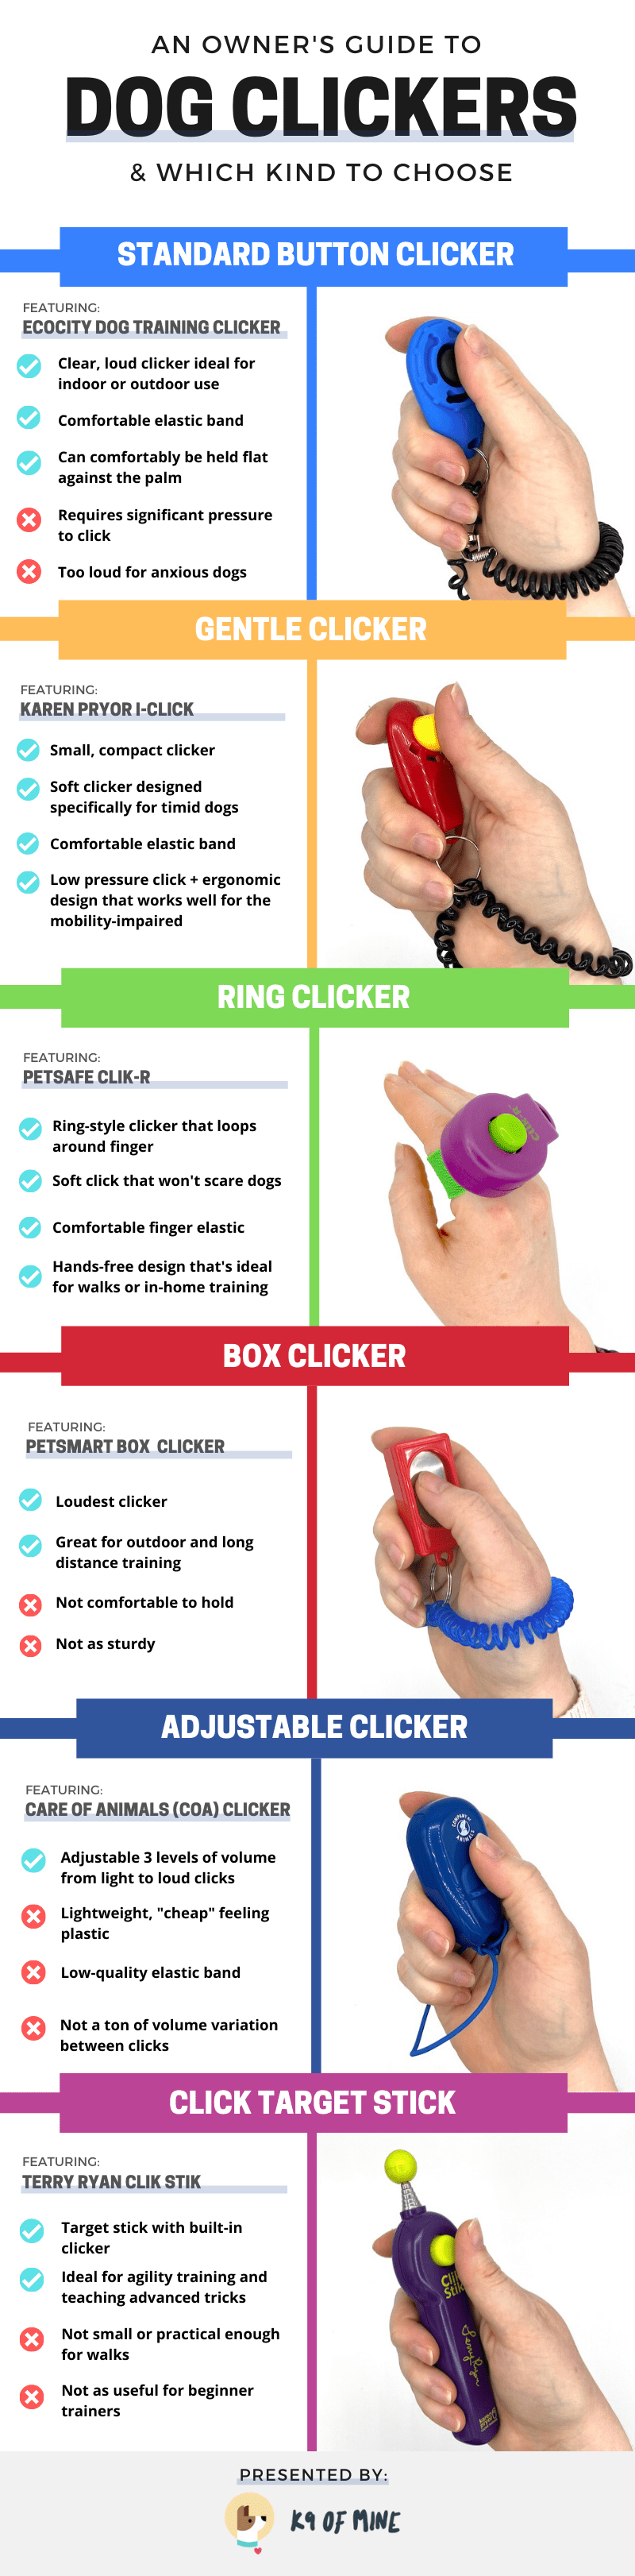 dog clicker infographic